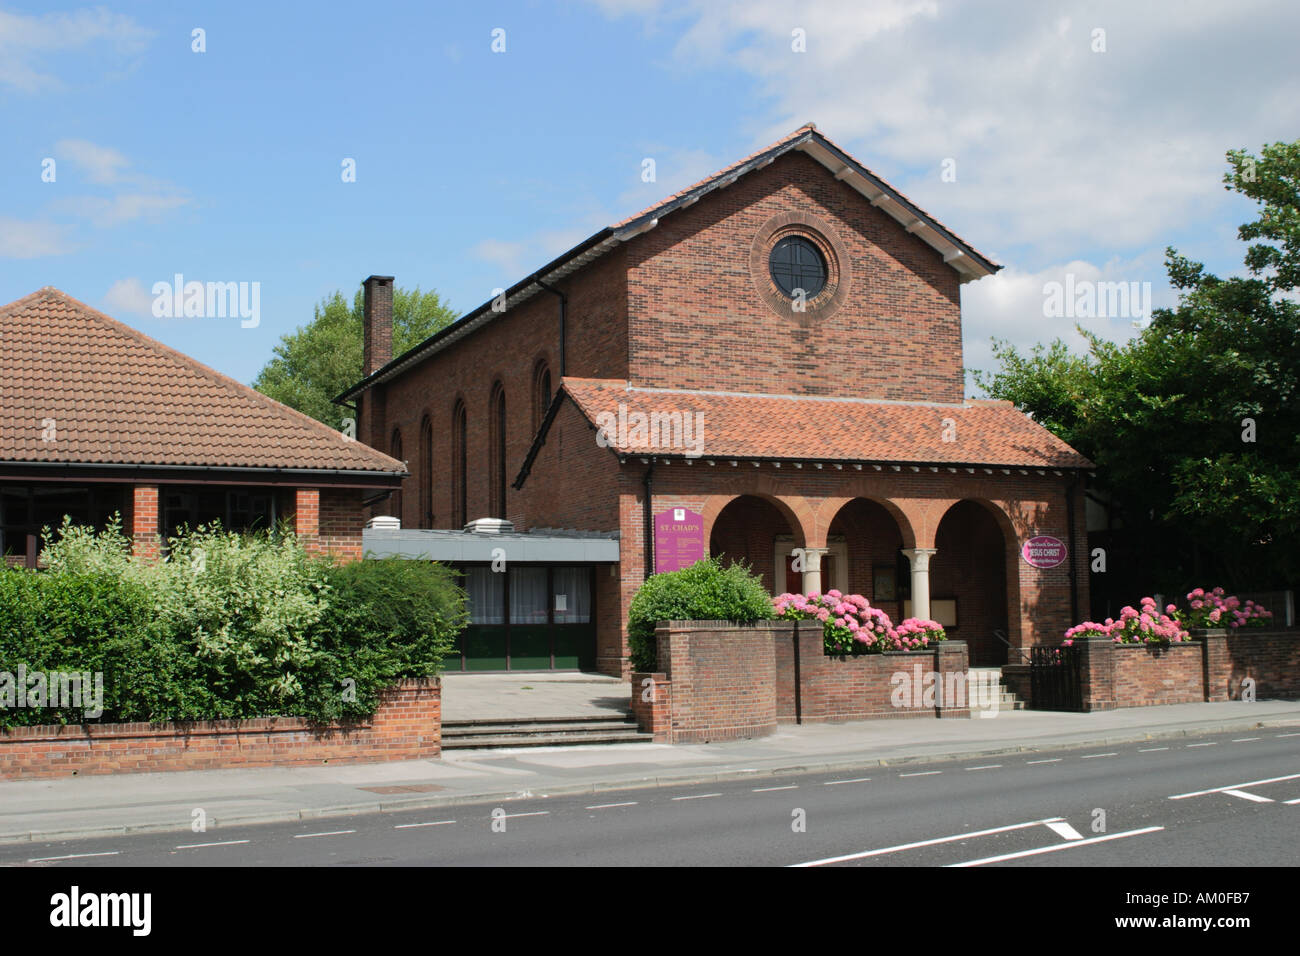 St. Chad's Church in Cheadle Village, Stockport, Cheshire Stock Photo